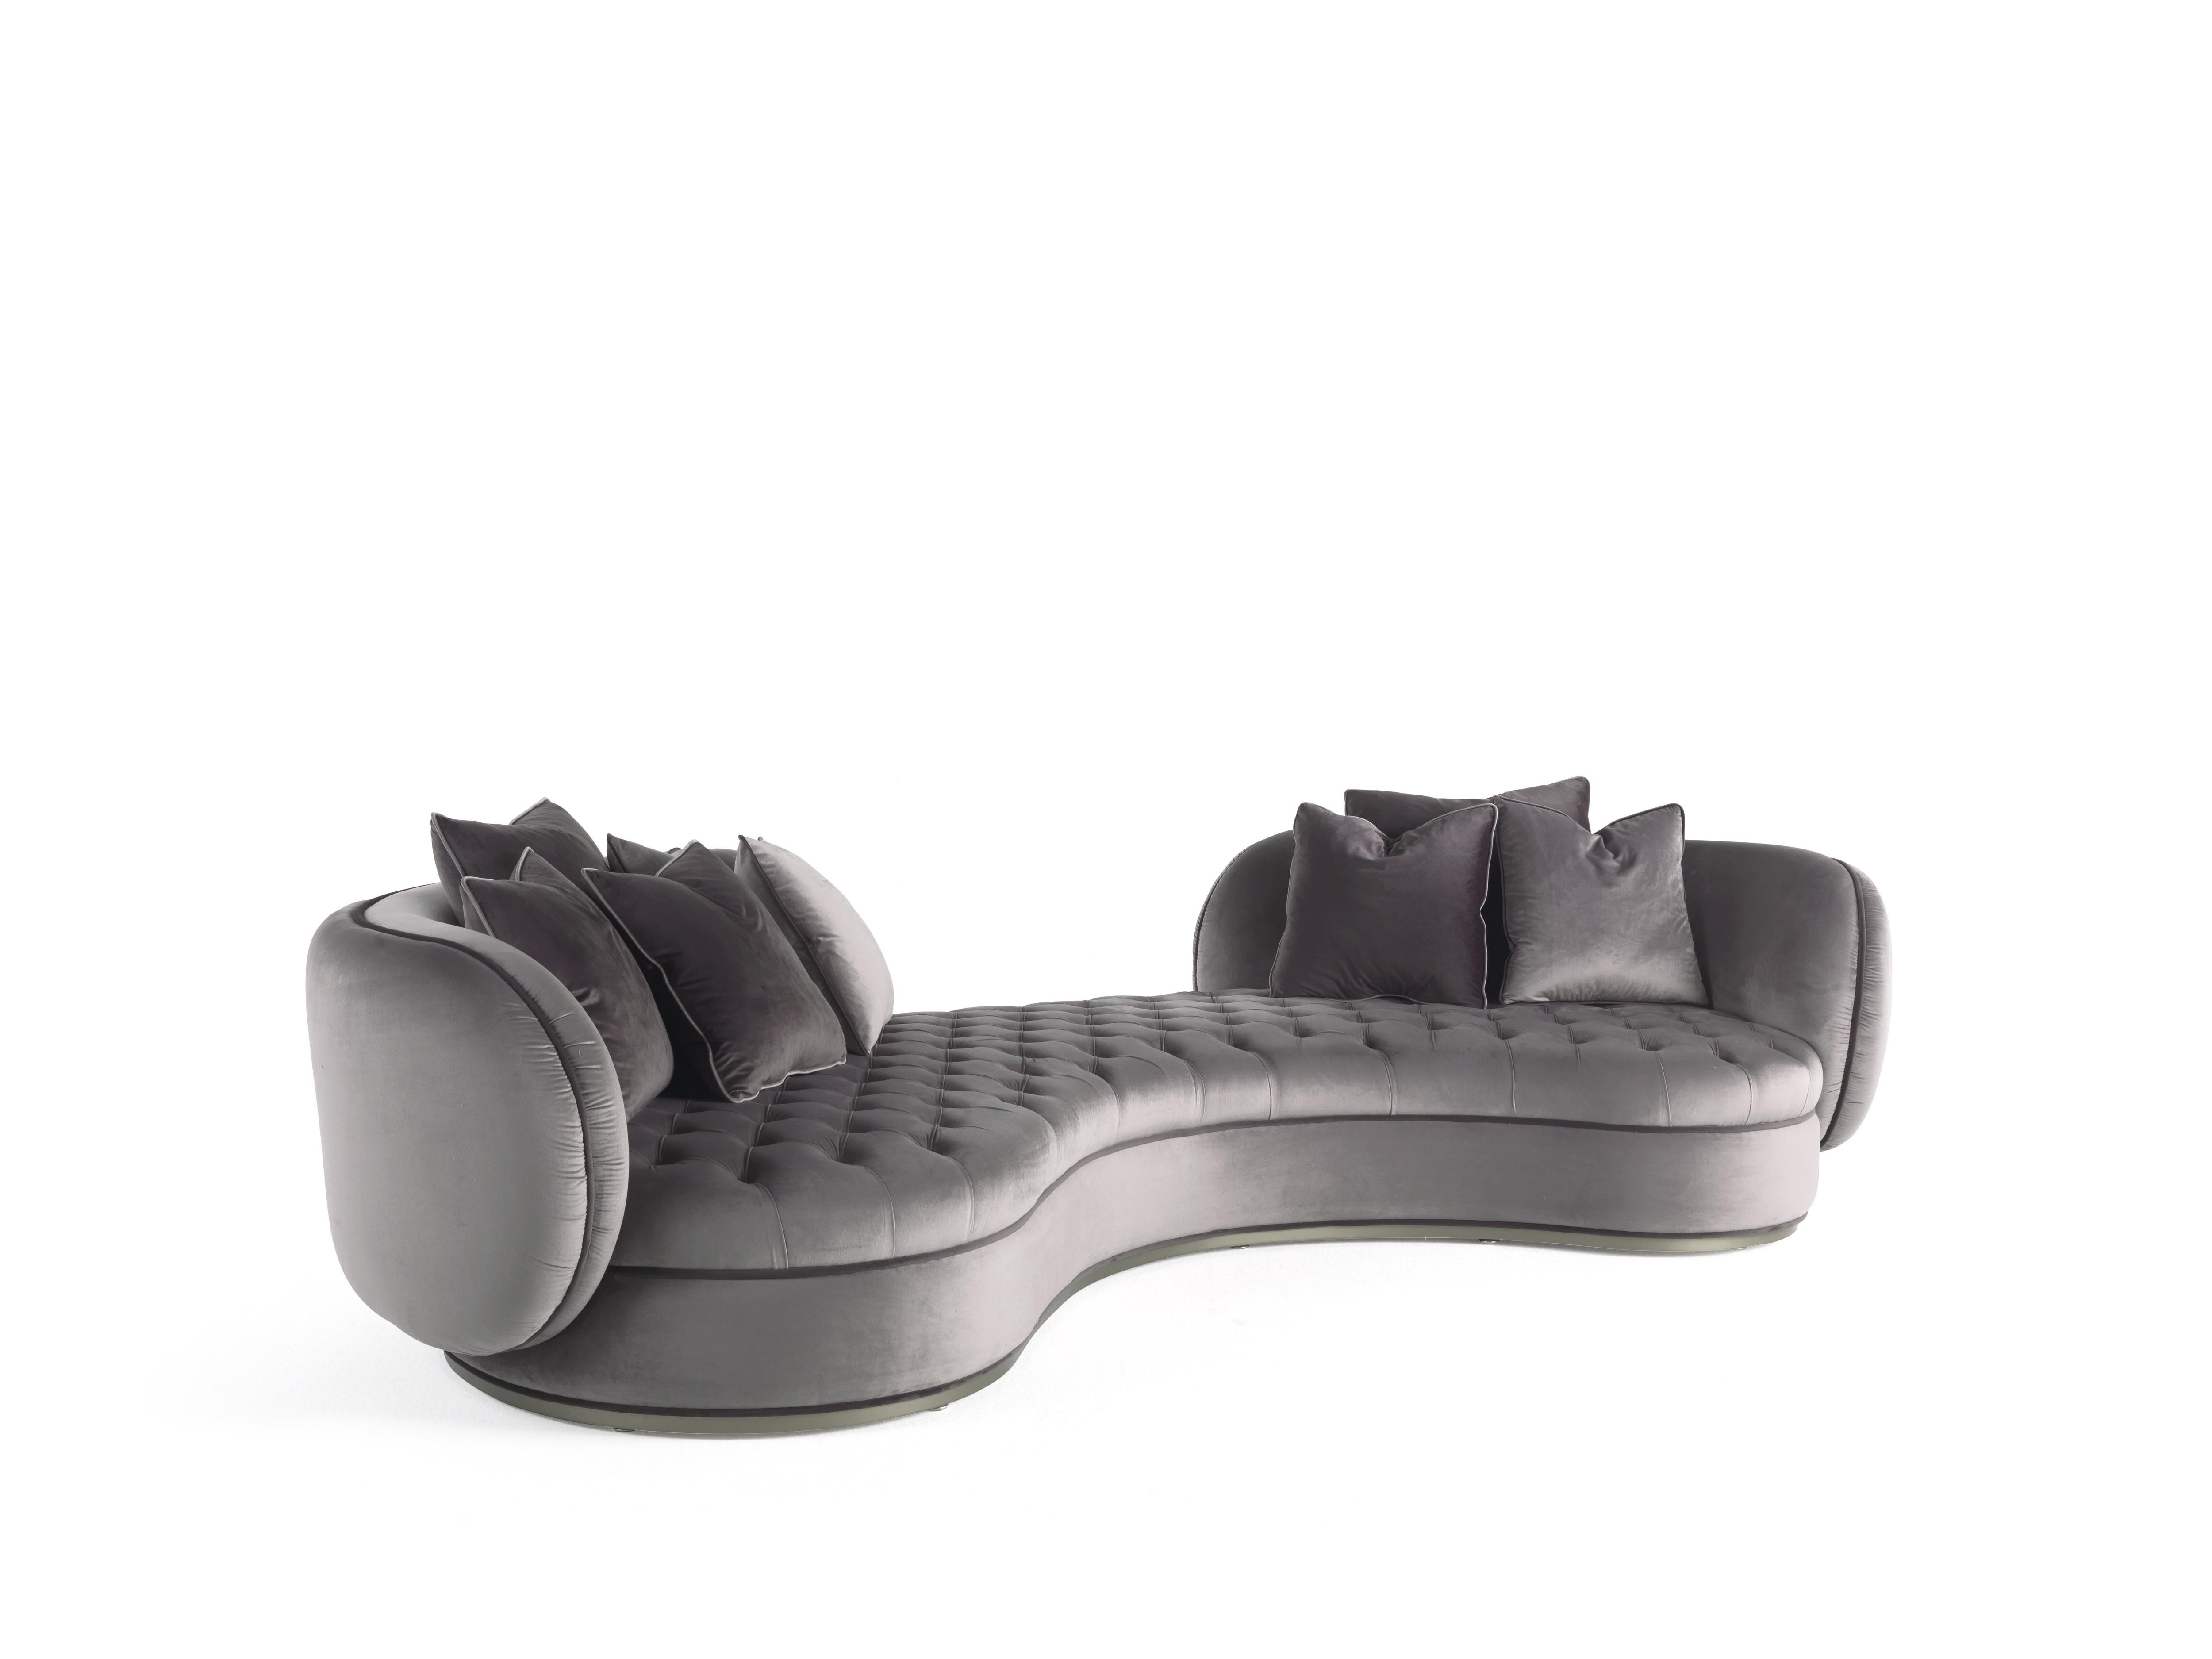 Tokyo is a precious and refined sofa characterized by sinuous, soft and curved lines, special quilted manufacturing and a comfortable backrest. En eclectic piece that is a strong, impactful addition to any living space.
Tokyo 3-seater sofa with